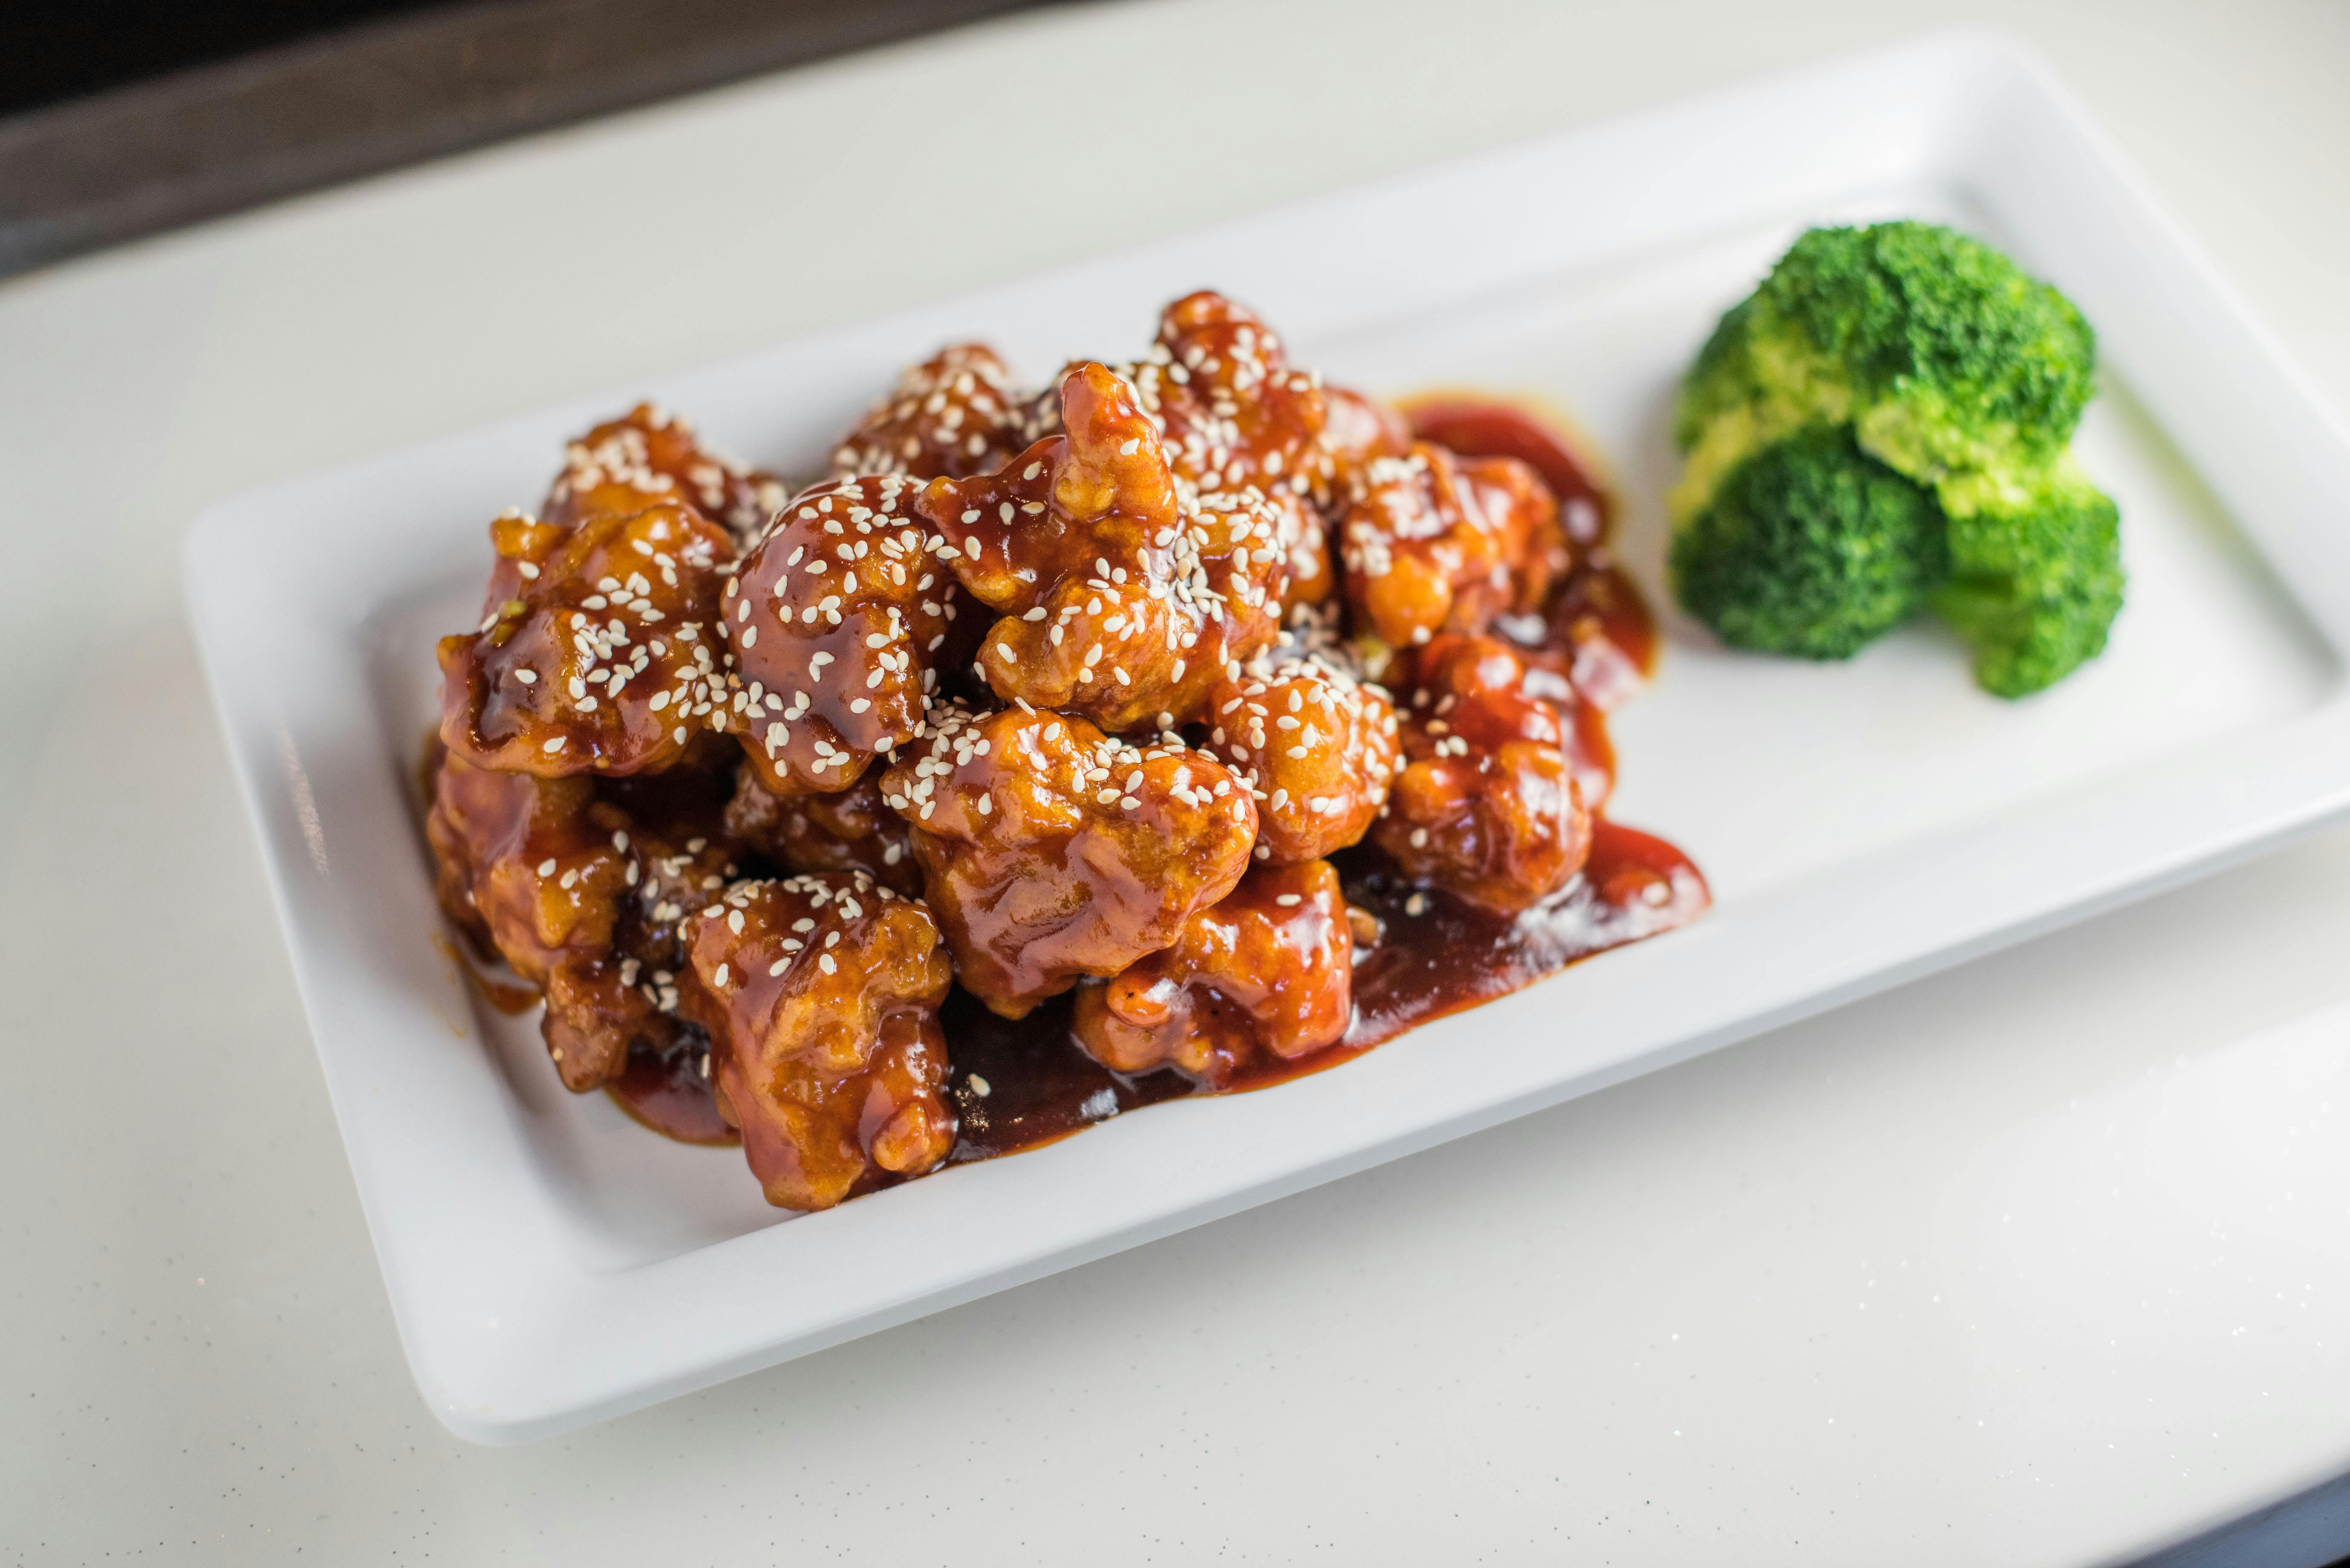 109. Sesame Chicken or Beef from Huan Xi in Milwaukee, WI